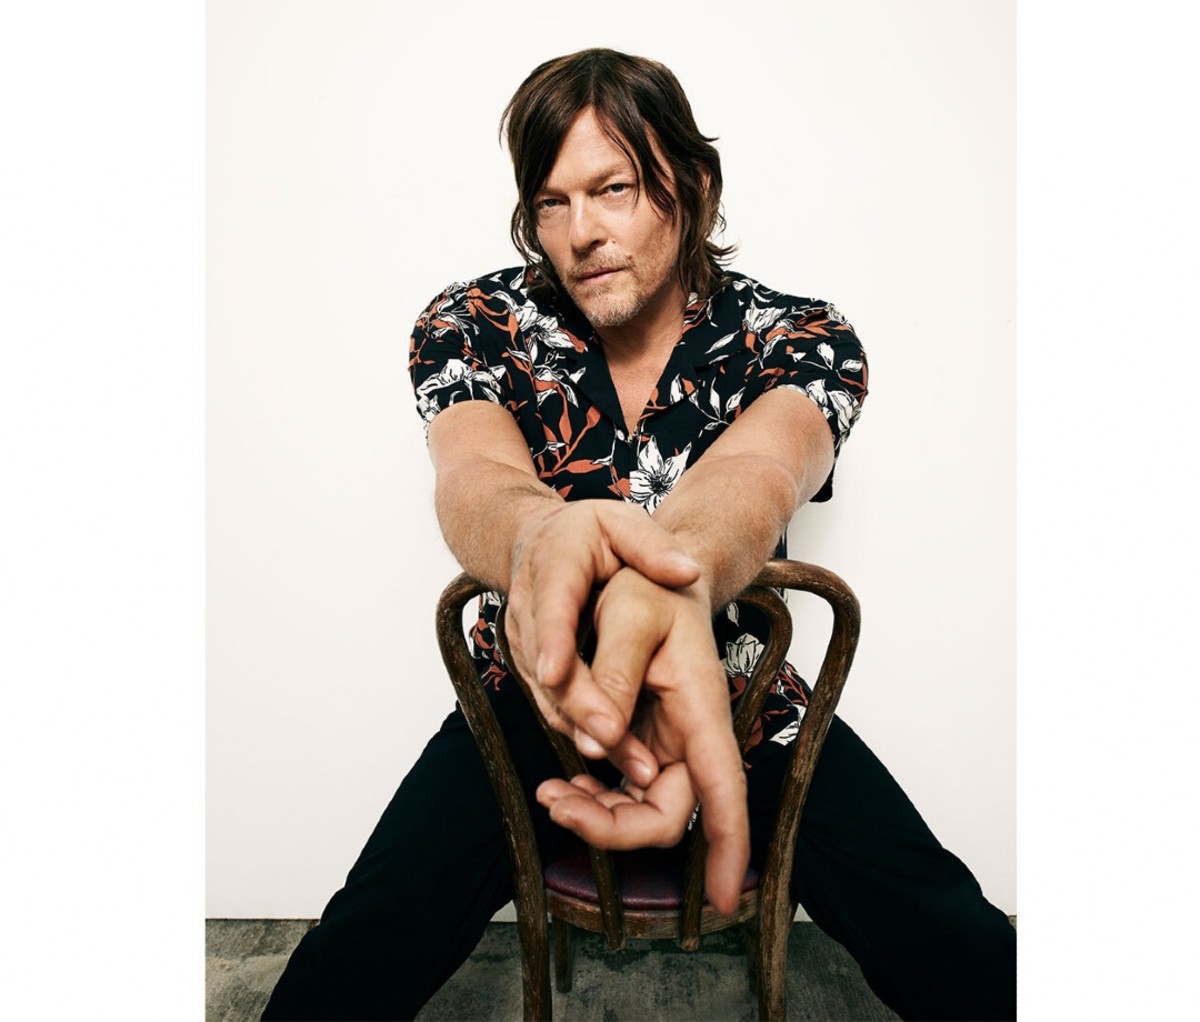 Norman Reedus on moving past his role on The Walking Dead.